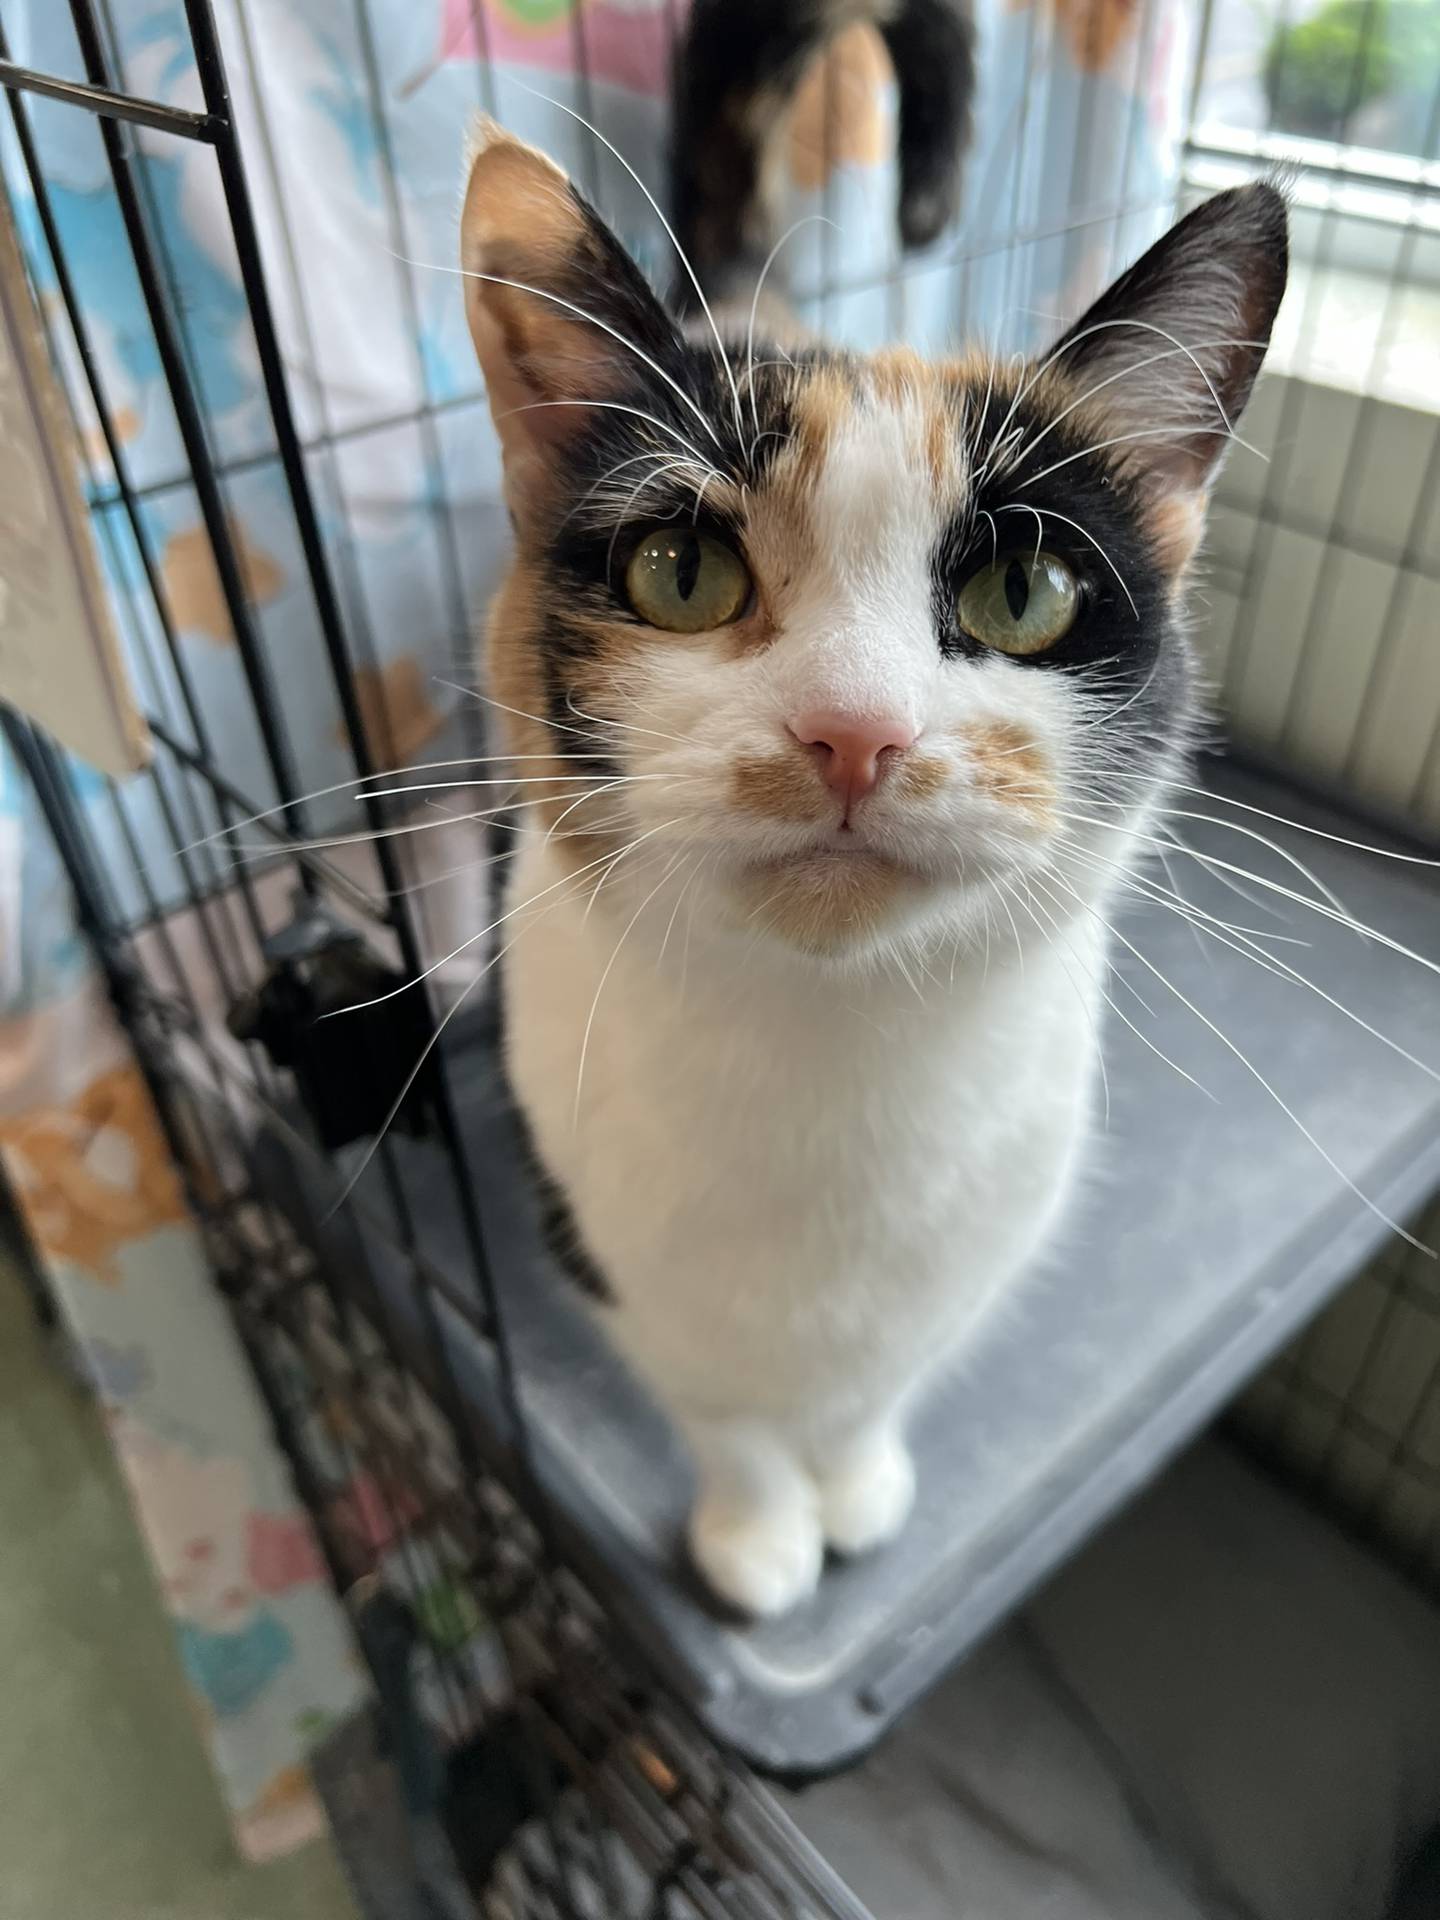 Saylor is a 4-year-old calico that came from an animal control in Kentucky. She is very gentle and loving. She waits patiently for pets and is always so appreciative of pets. She has soft fur and big, expressive eyes. She deserves a second chance at a life full of love. To meet Saylor, email Catadoptions@nawsus.org. Visit nawsus.org.